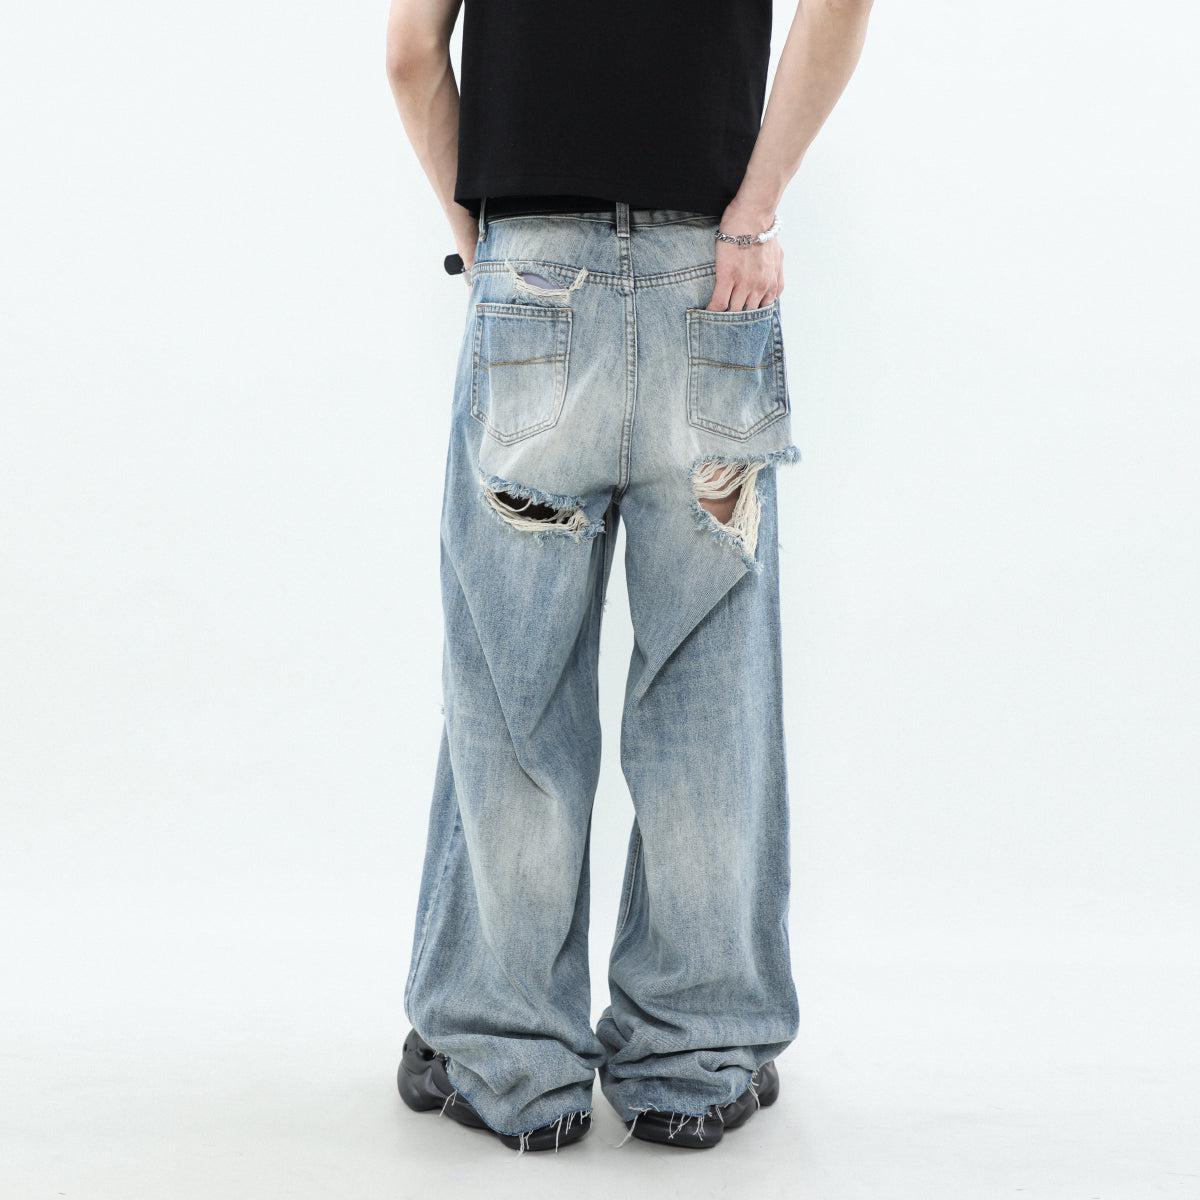 Mr Nearly Washed Ripped Hole Jeans Korean Street Fashion Jeans By Mr Nearly Shop Online at OH Vault